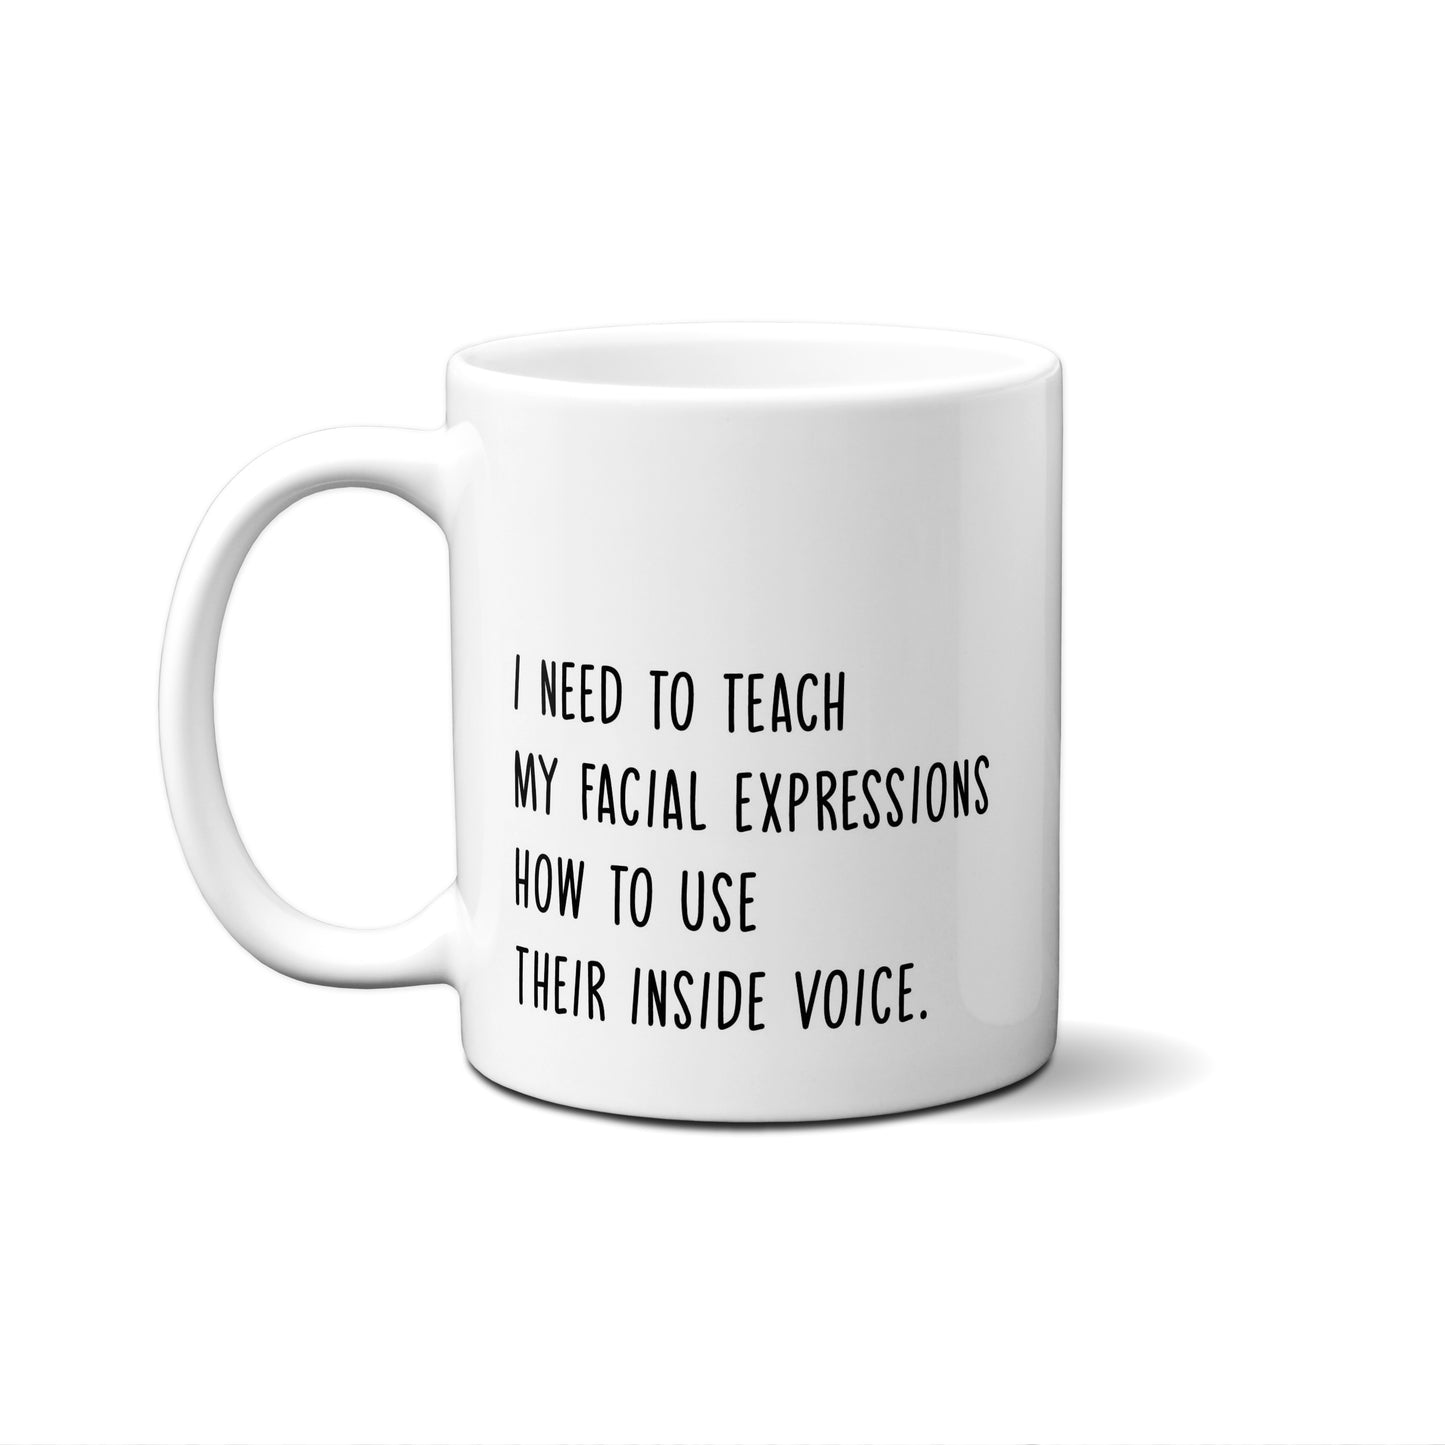 I Need To Teach My Facial Expressions How To Use Their Inside Voice. Quote Mug